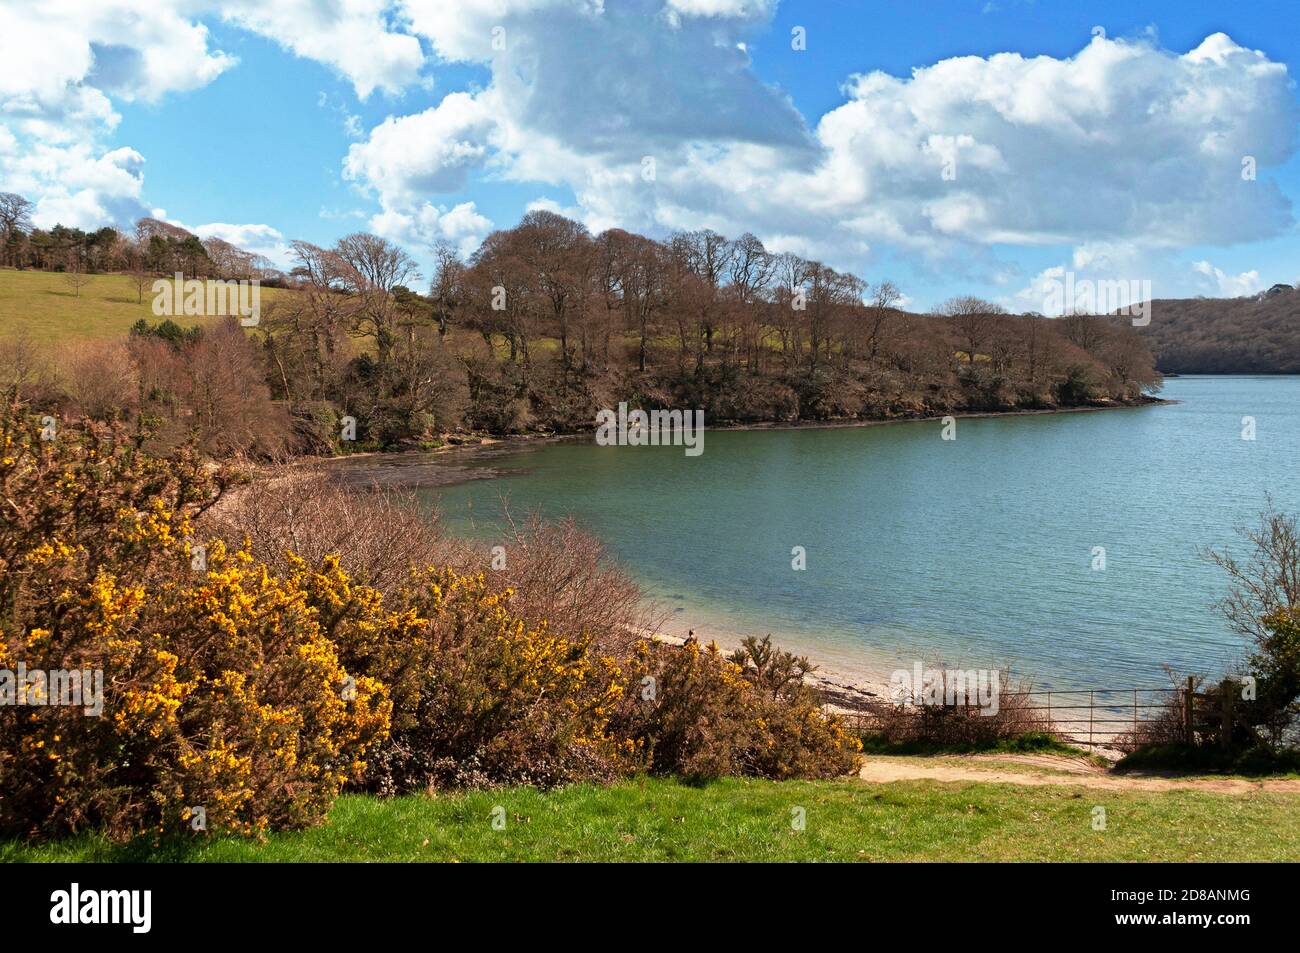 A quiet cove at trelissick on the helford river in cornwall, england Stock Photo